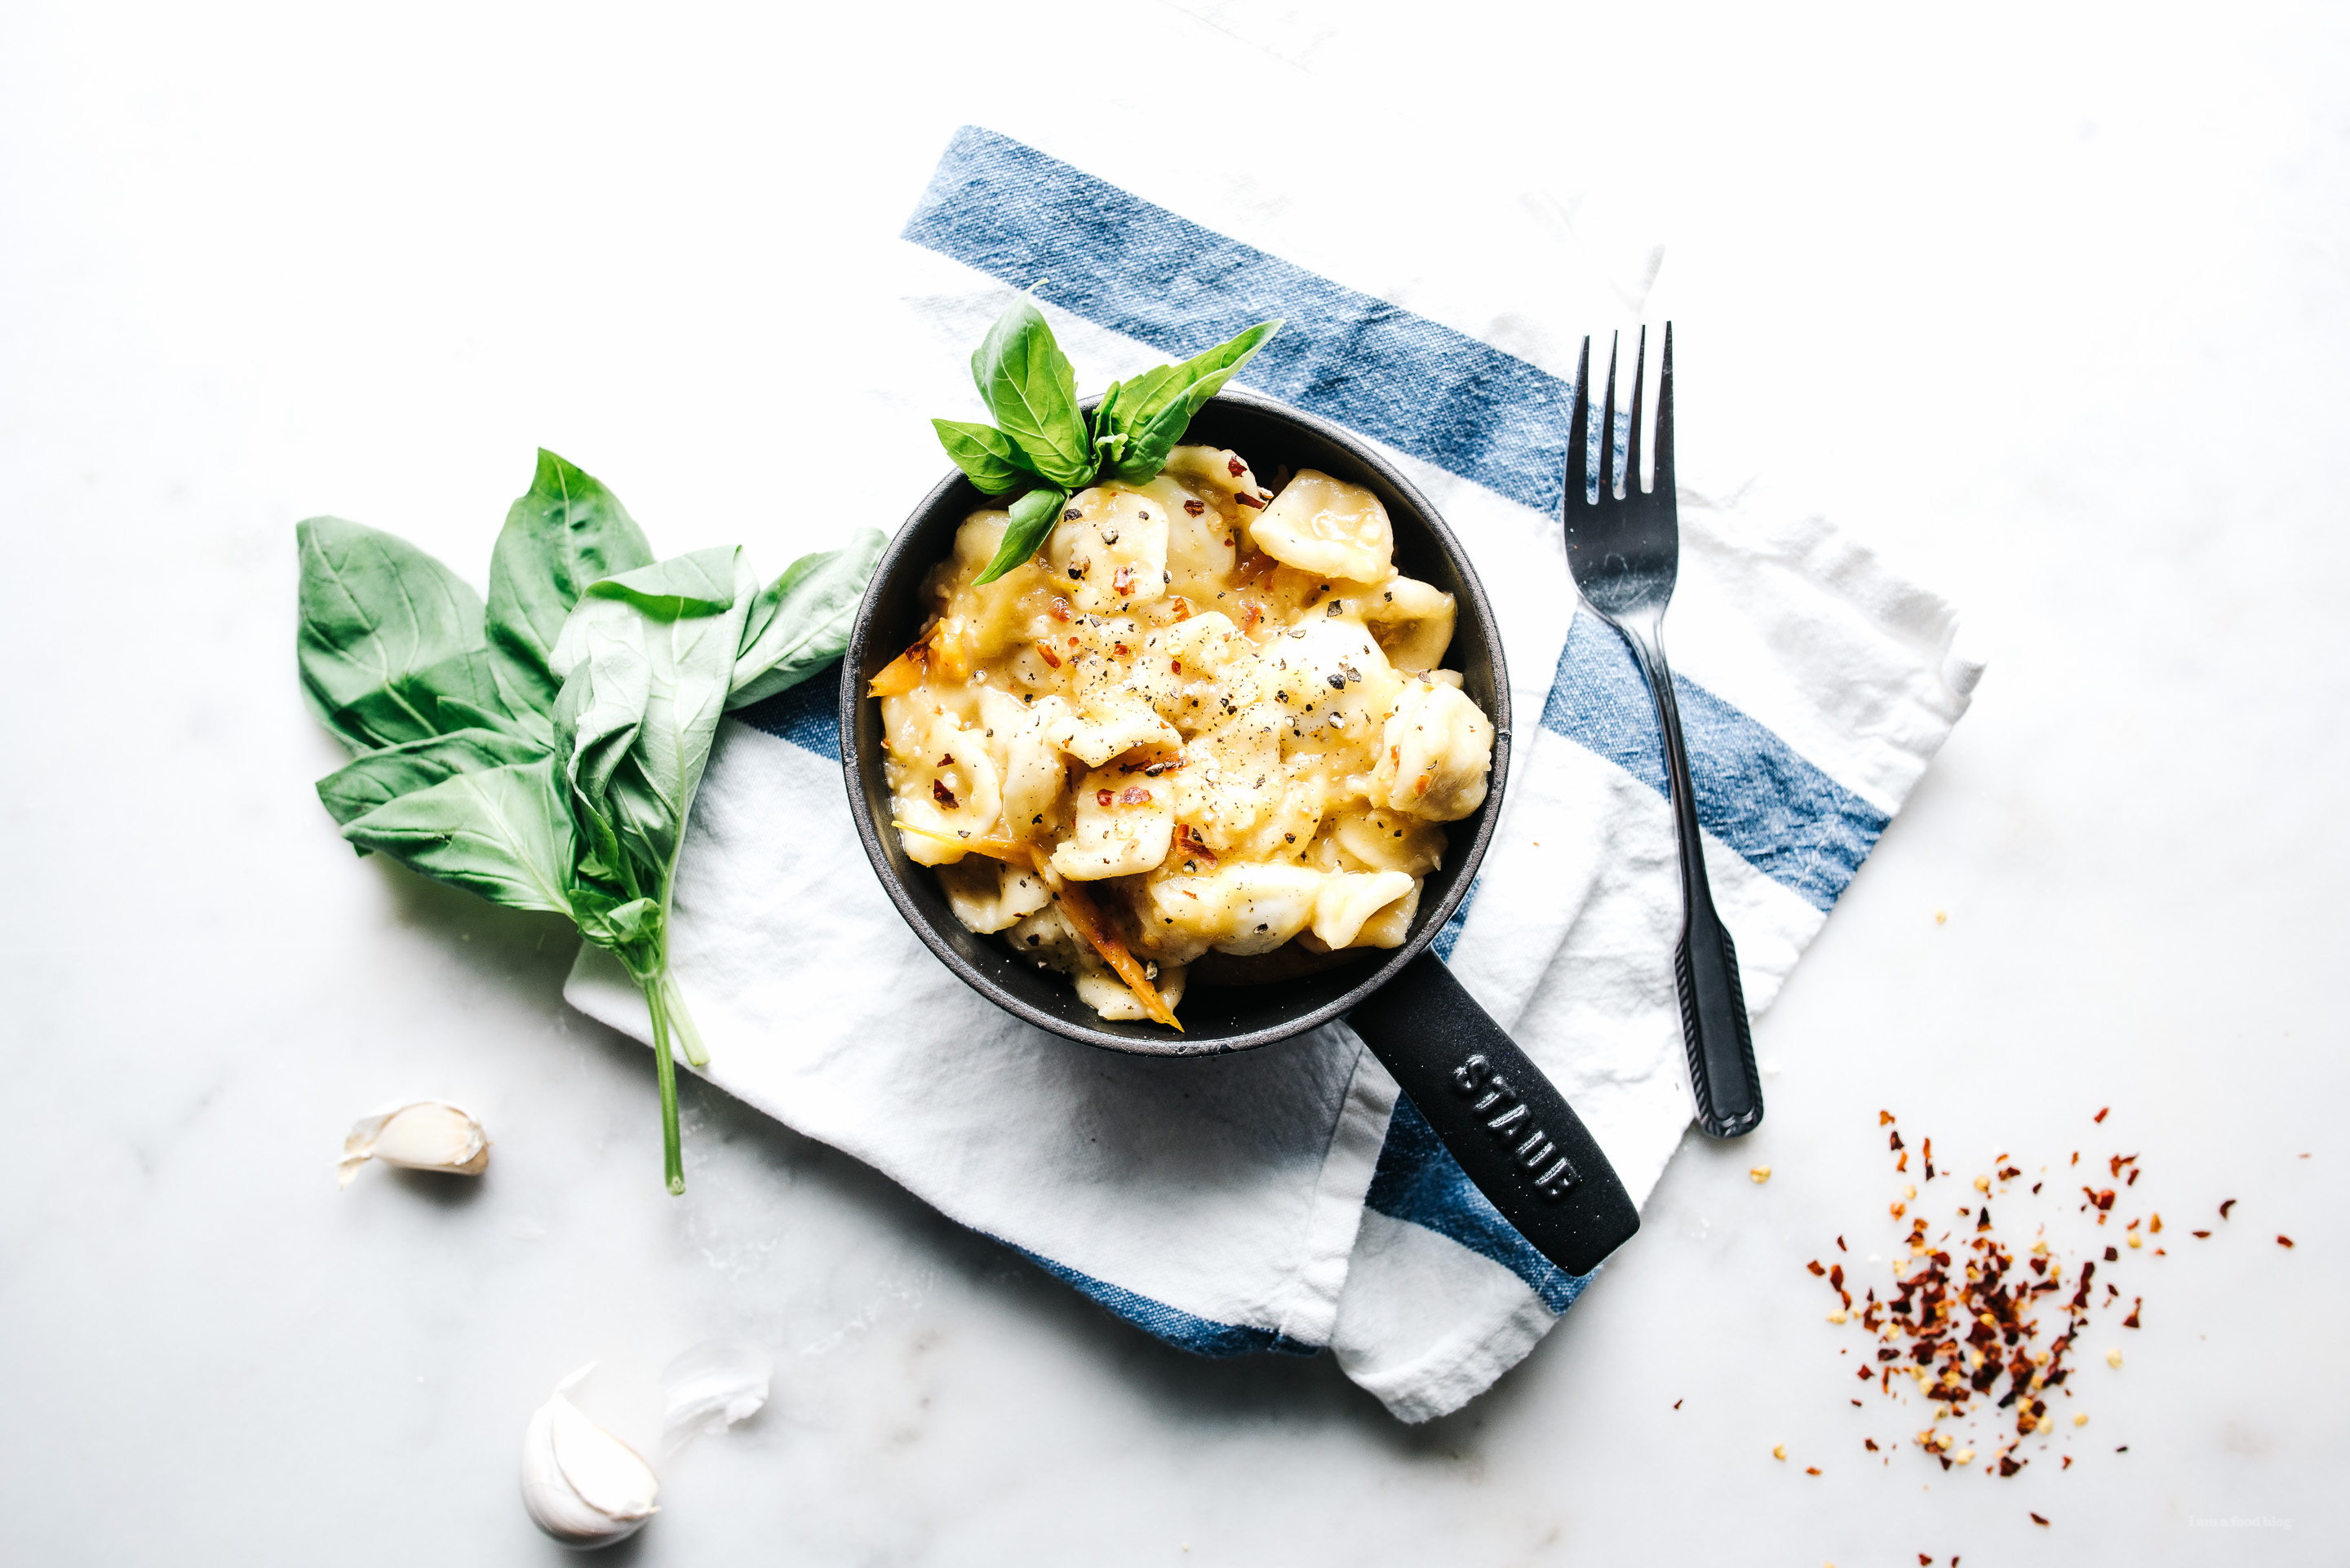 st. patrick's day pot of gold pasta - orecchiette with yellow tomatoes and bocconcini recipe - www.iamafoodblog.com